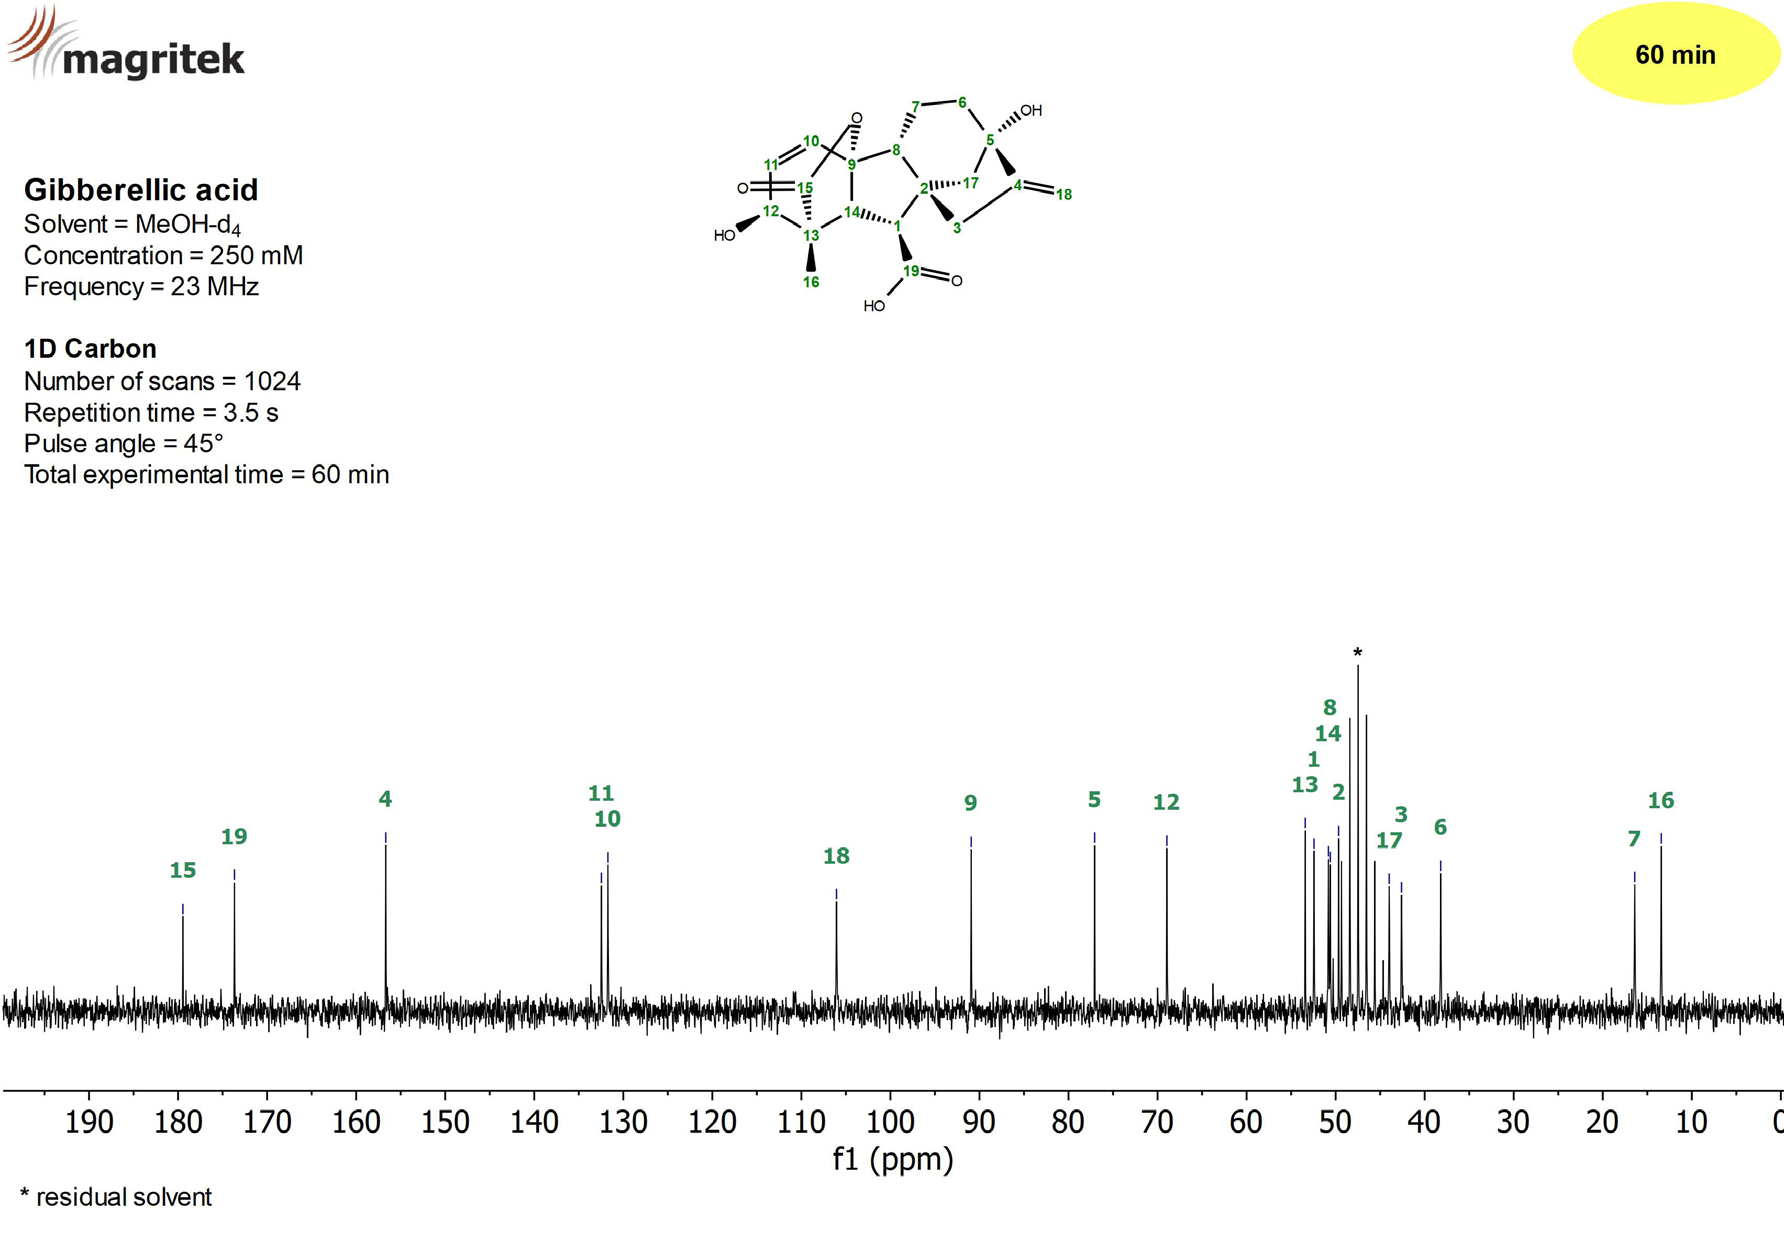 13C NMR spectrum of a 250 mM Gibberellic acid sample in MeOH-d4 measured on a Spinsolve 90 MHz system in 60 minutes.